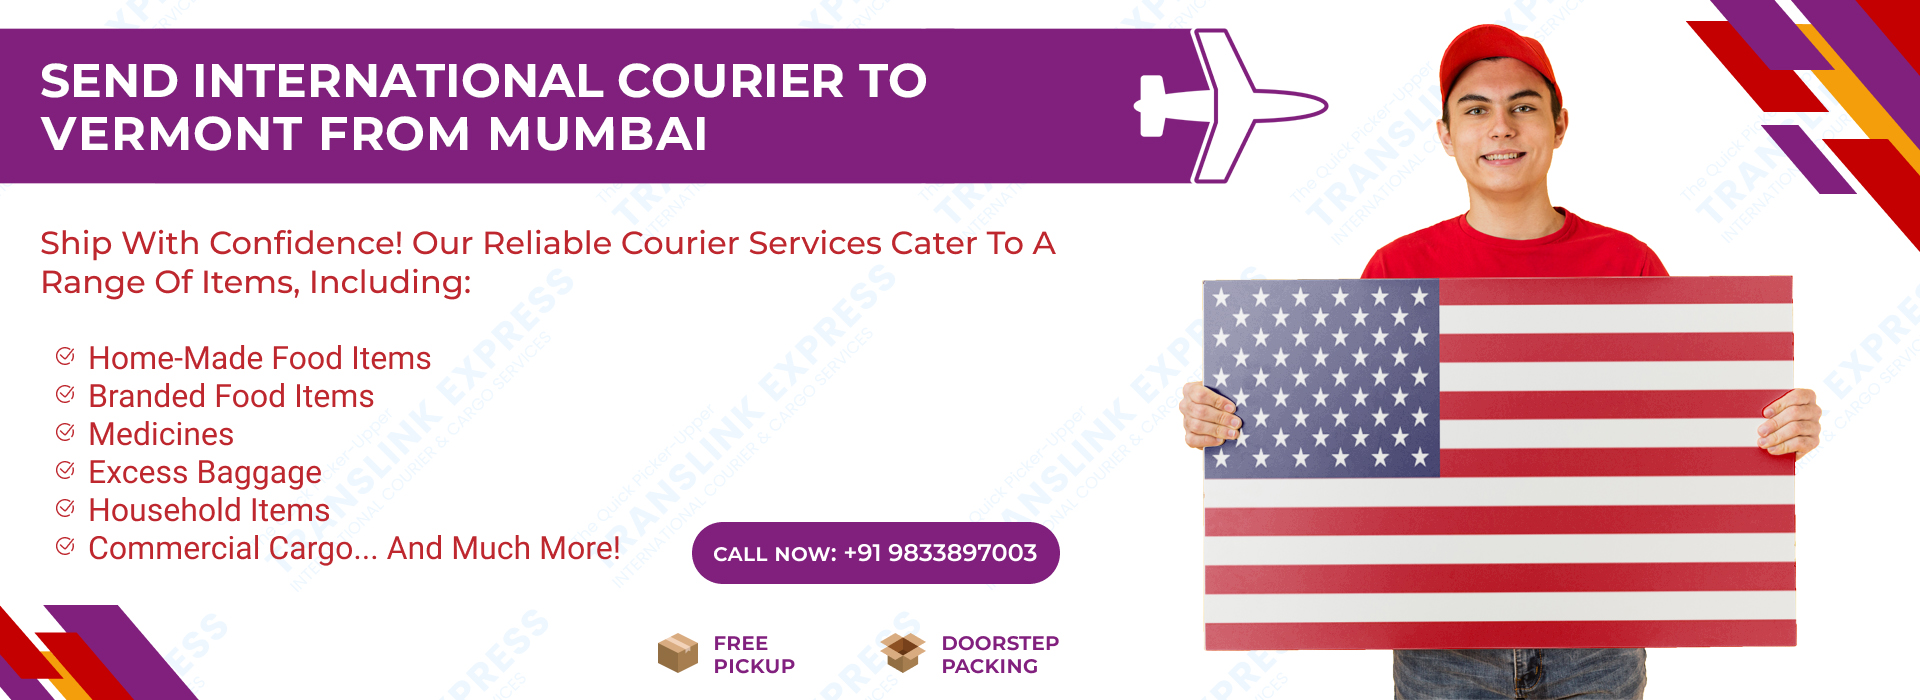 Courier to Vermont From Mumbai